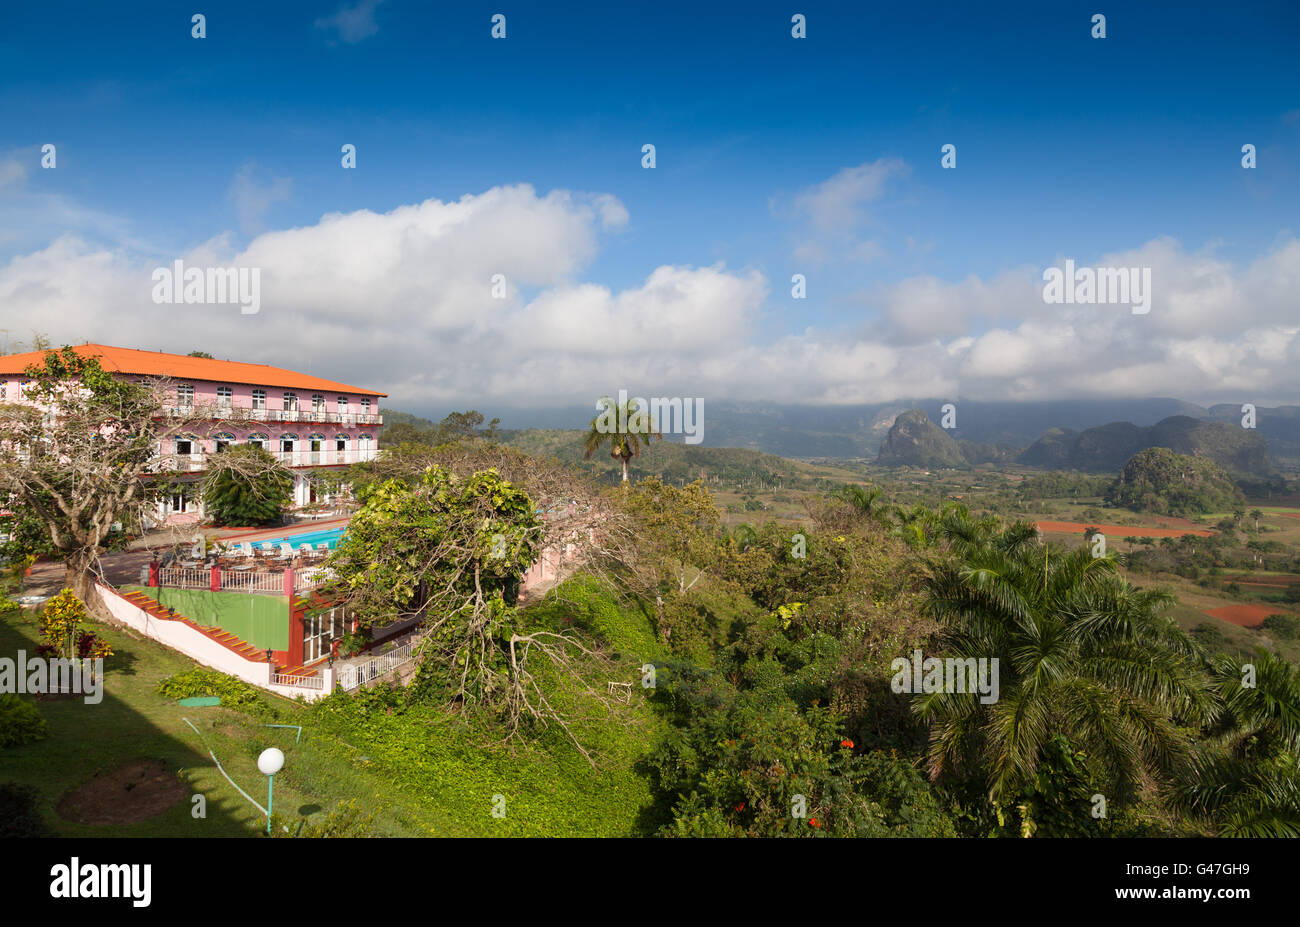 Hotel with exceptional views of the Vinales valley Stock Photo